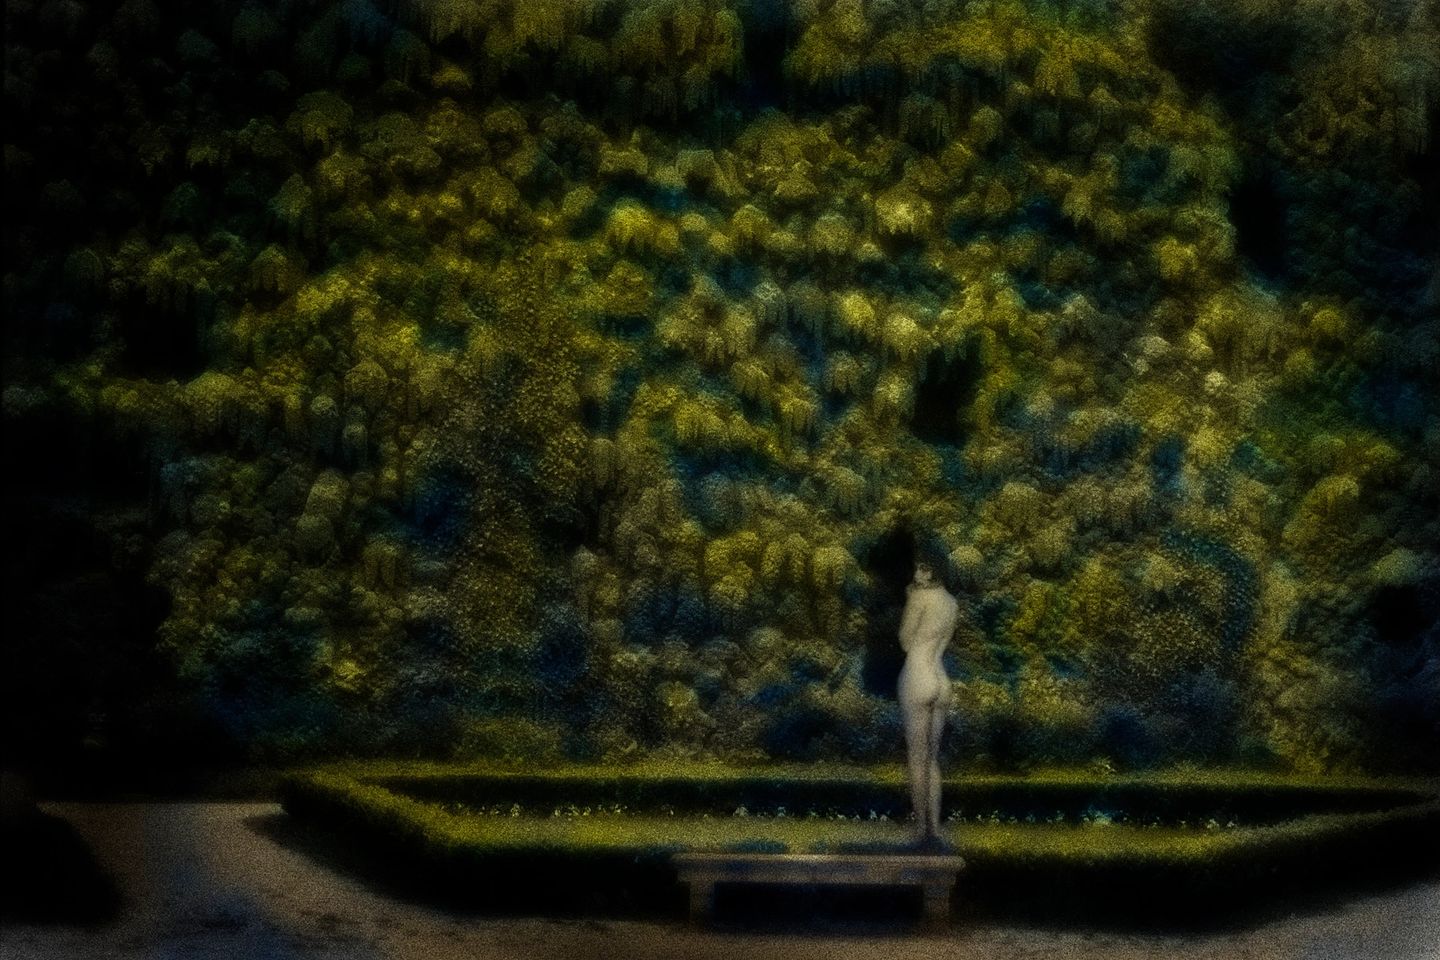 A blurry image of a person standing in front of a wall.